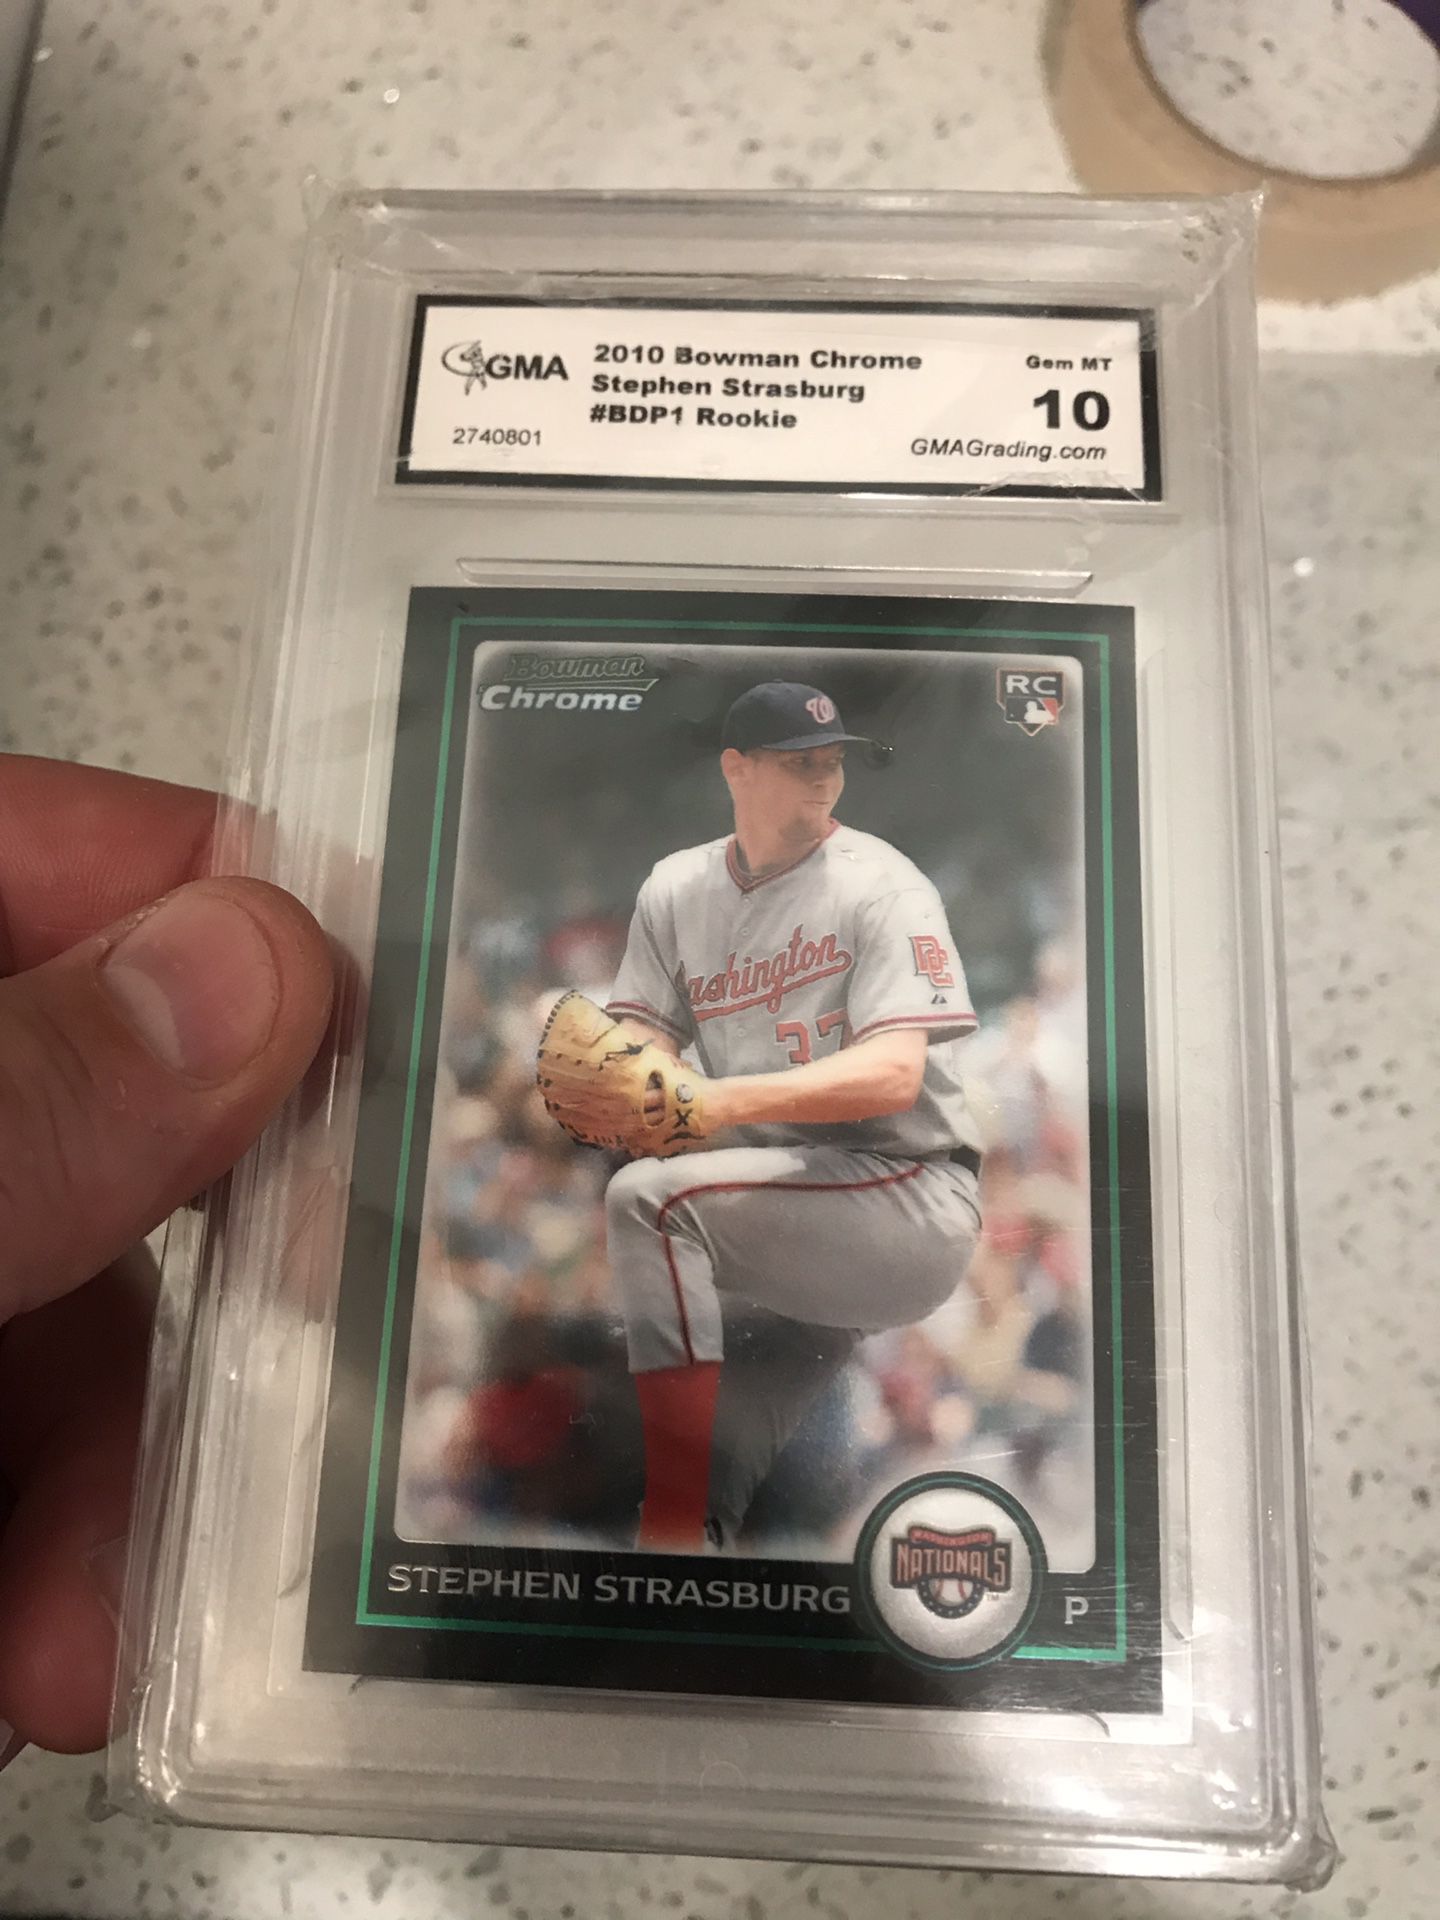 Graded Superstar baseball cards. $8 each. Will combine shipping